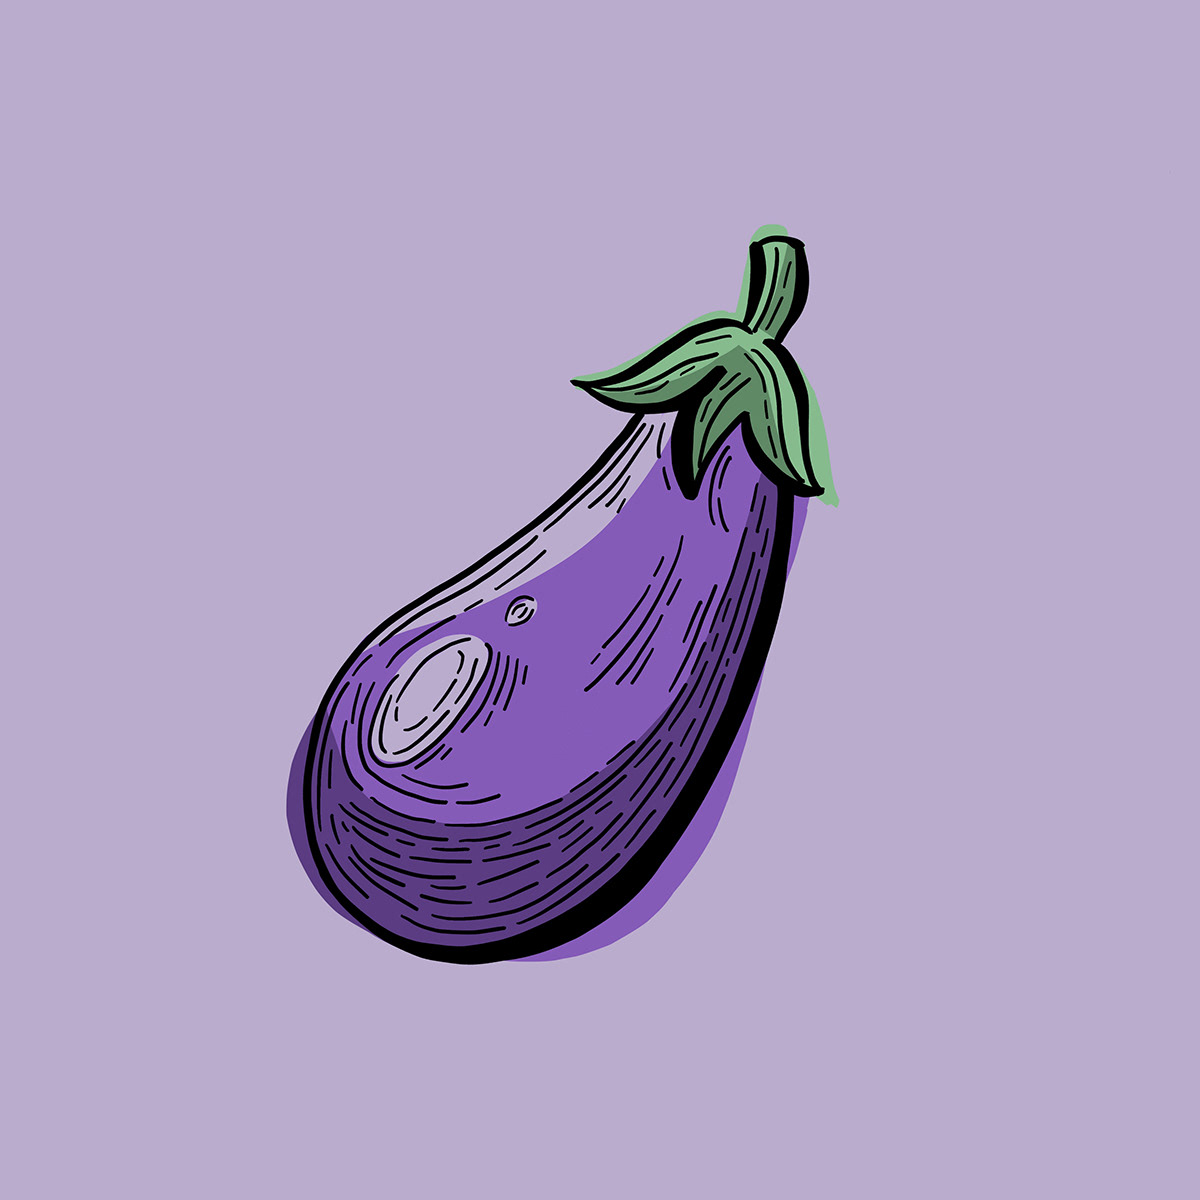 Eggplant illustrated in a line art style. Vintage vibes of a woodblock carving 